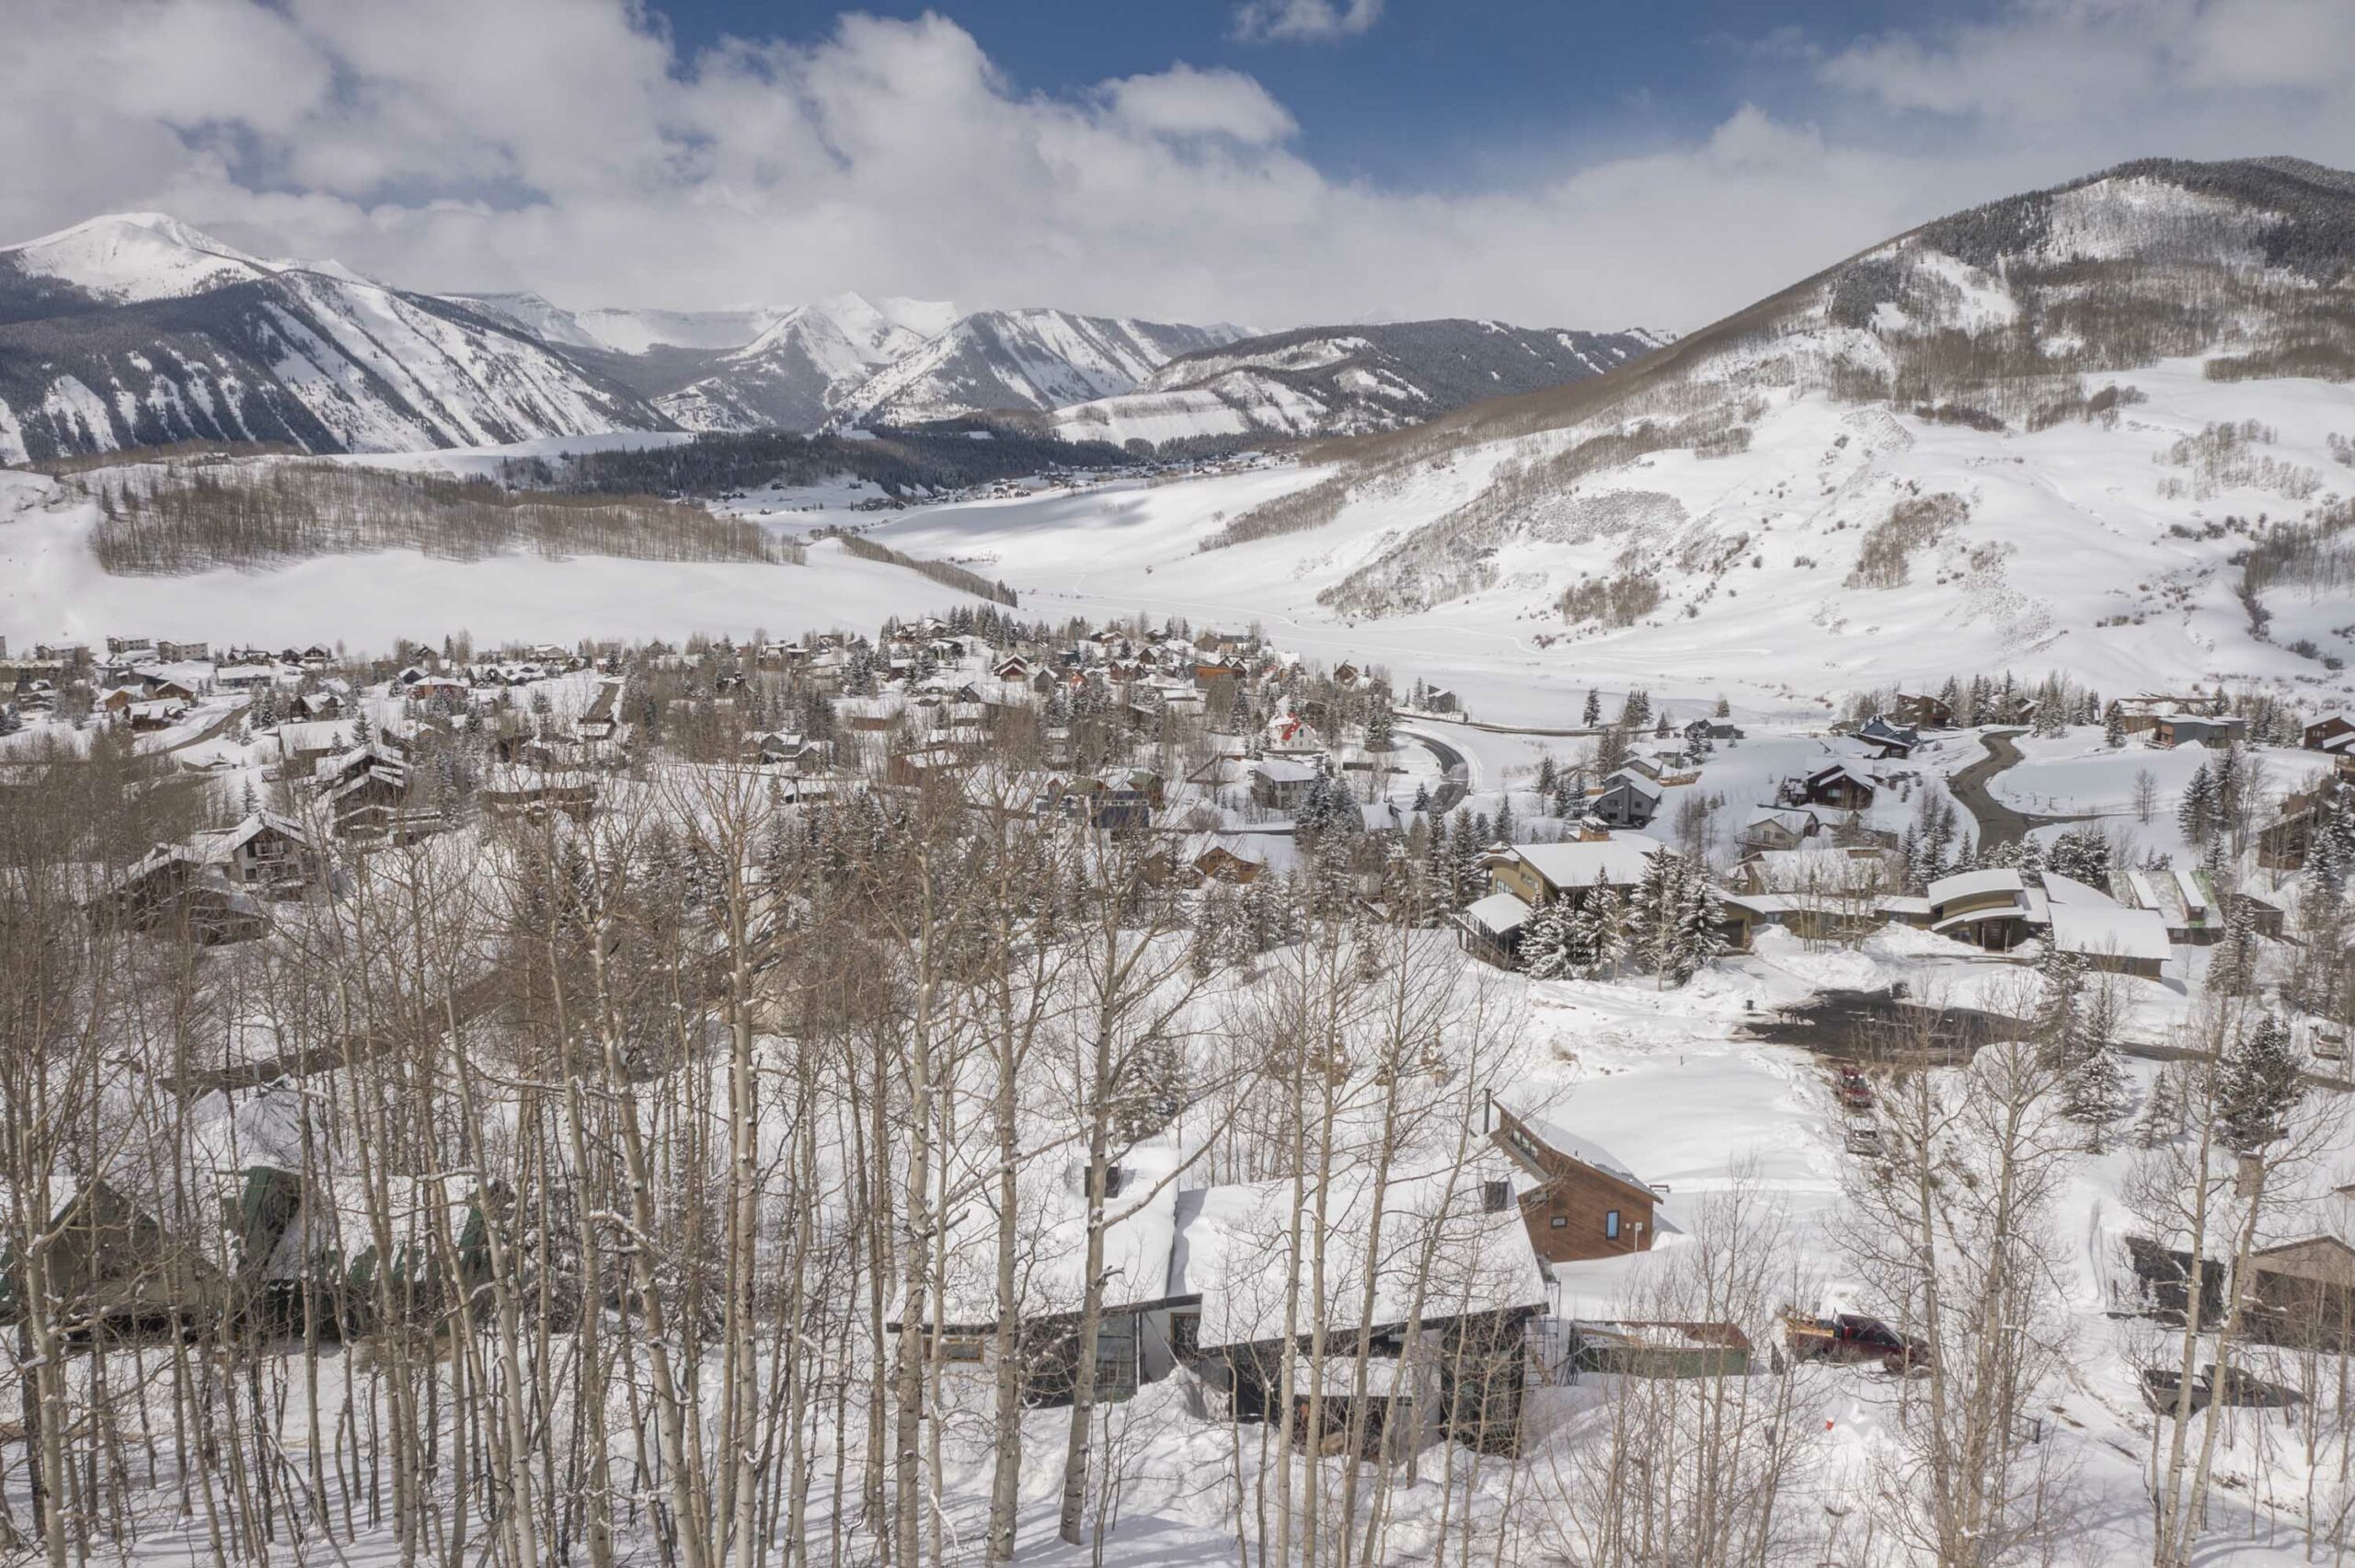 38 Ruby Drive Mt. Crested Butte, Colorado - drone view